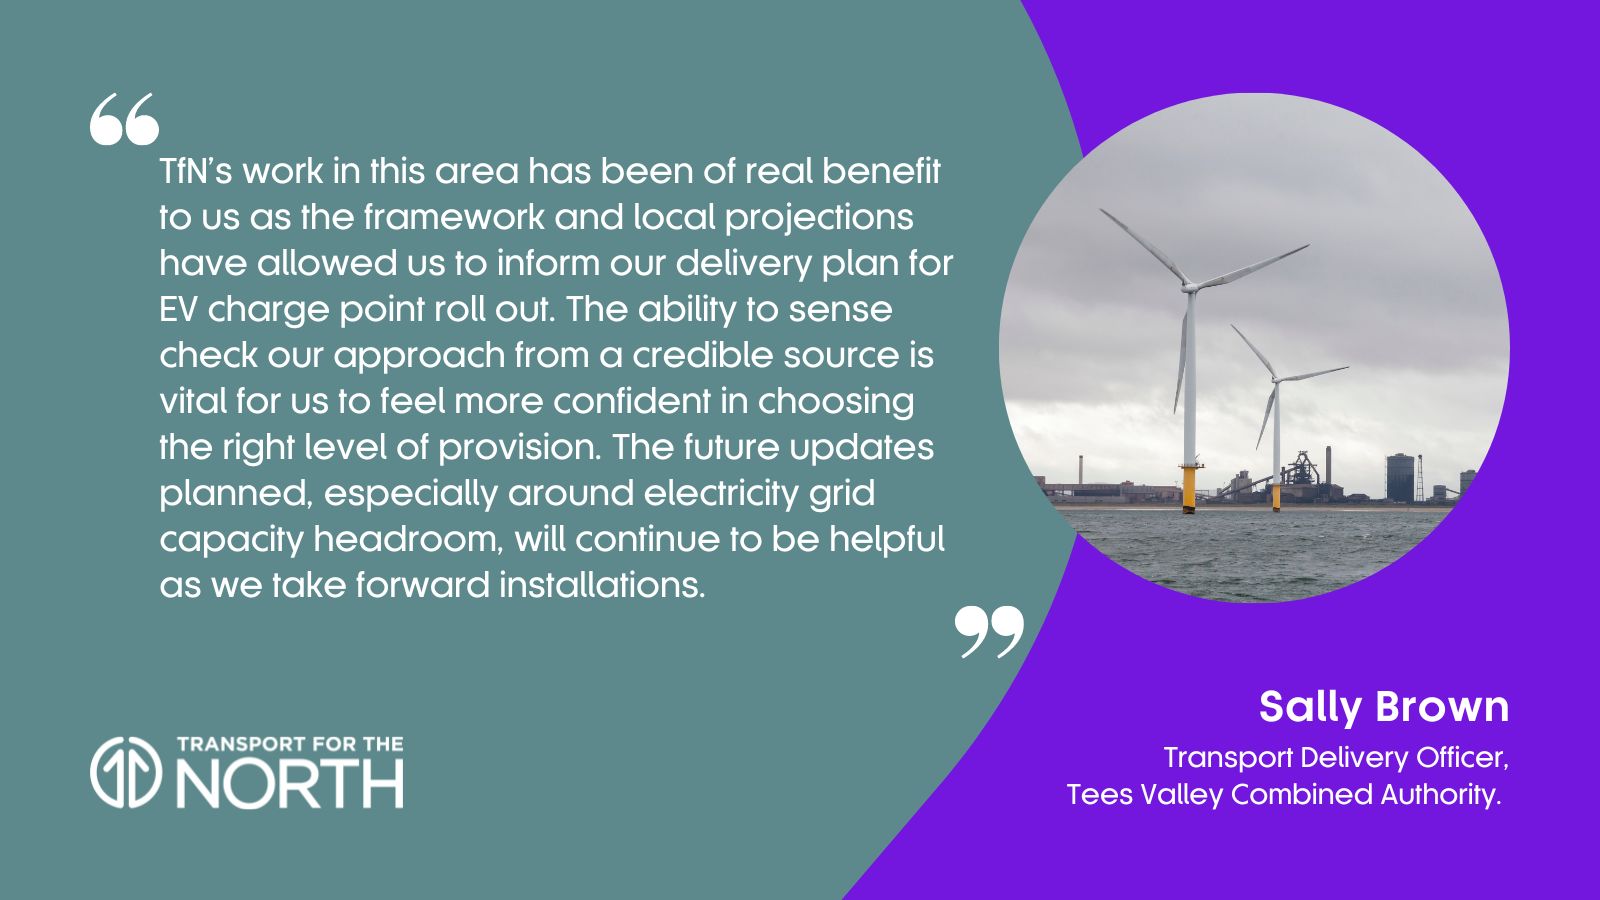 Tees Valley Combined Authority on the benefits of TfN's EVCI tool.